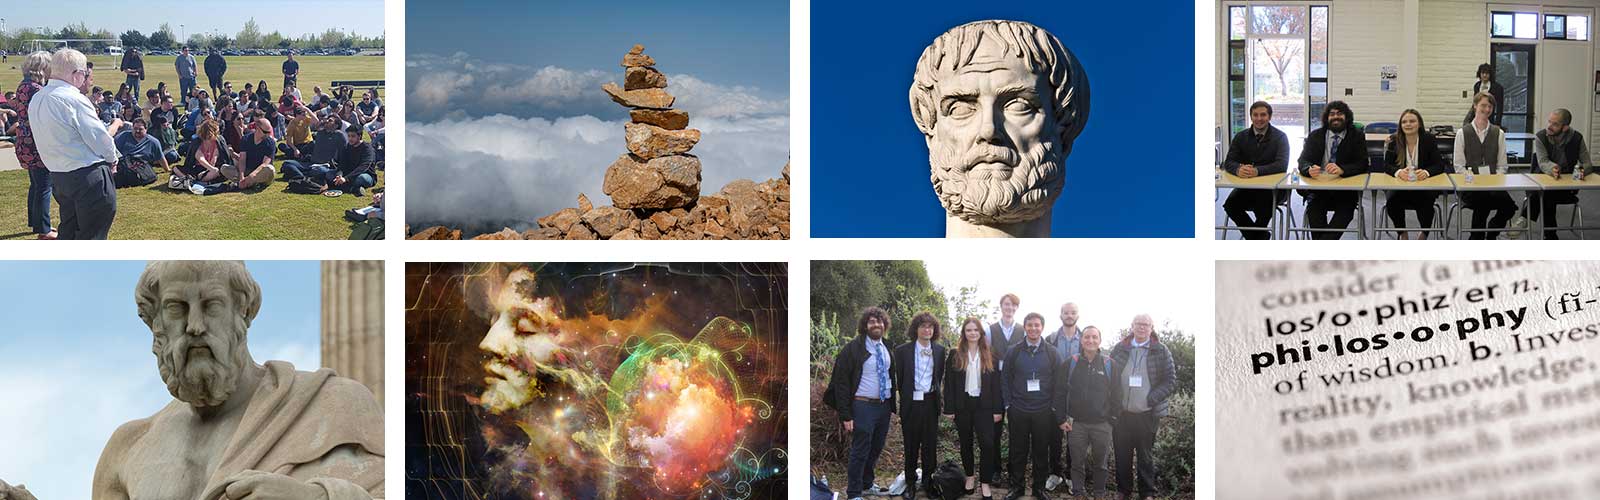 A variety of images showing various famous philosophers such as Socrates and Plato.